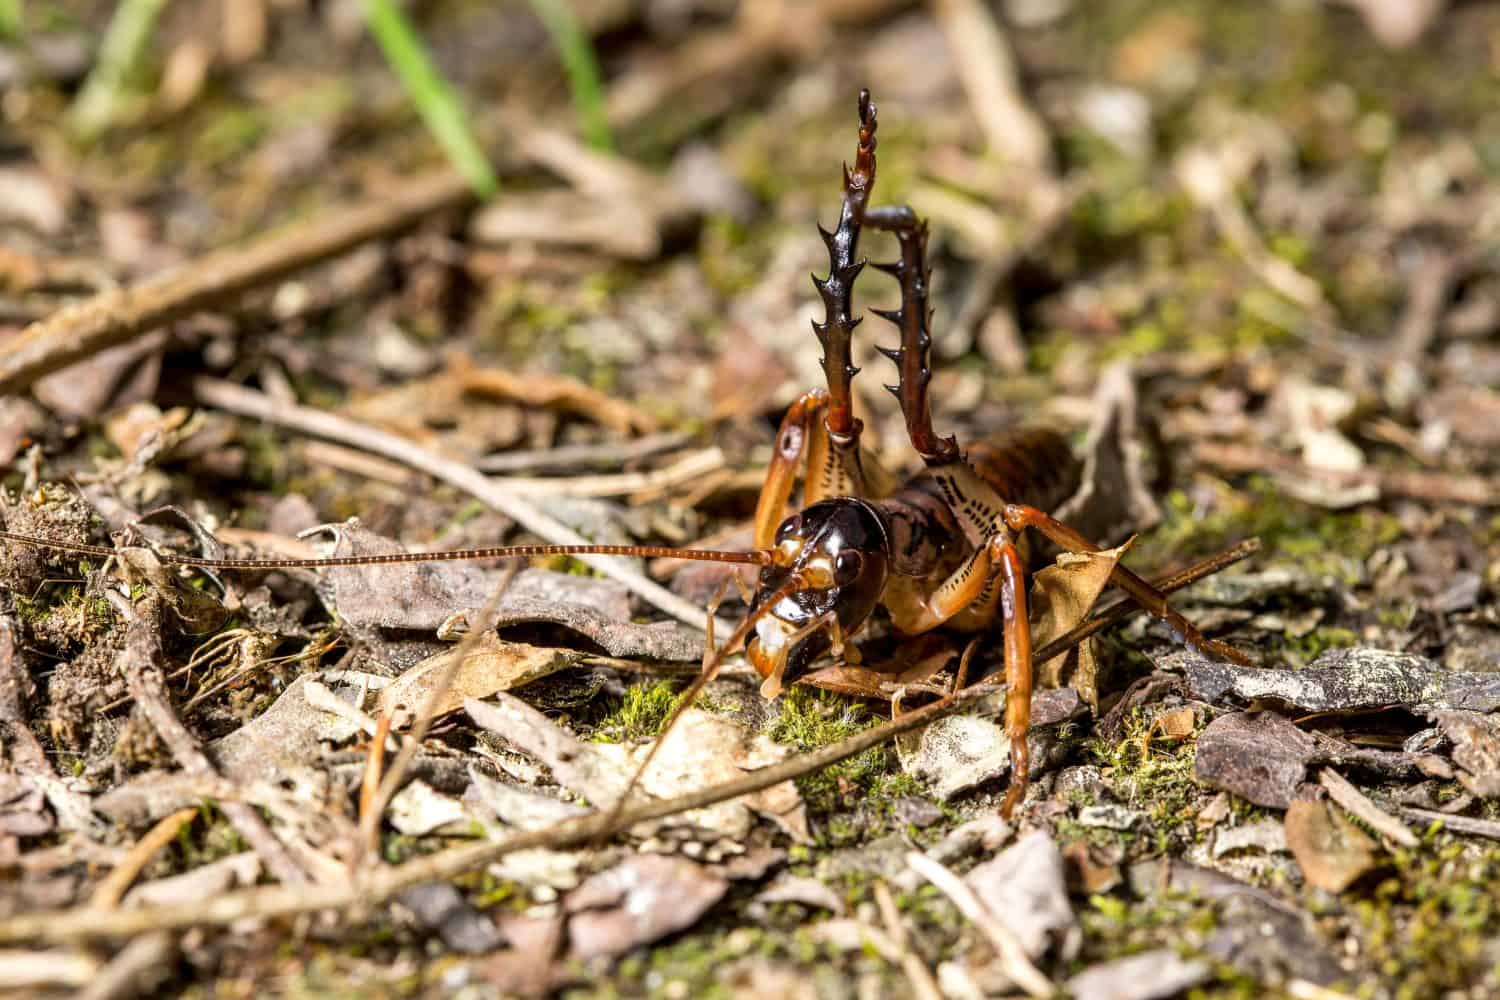 Auckland Tree Weta (Hemideina thoracica) in a defensive pose, photographed low down on a leaf littered floor, in Rotorua, New Zealand.